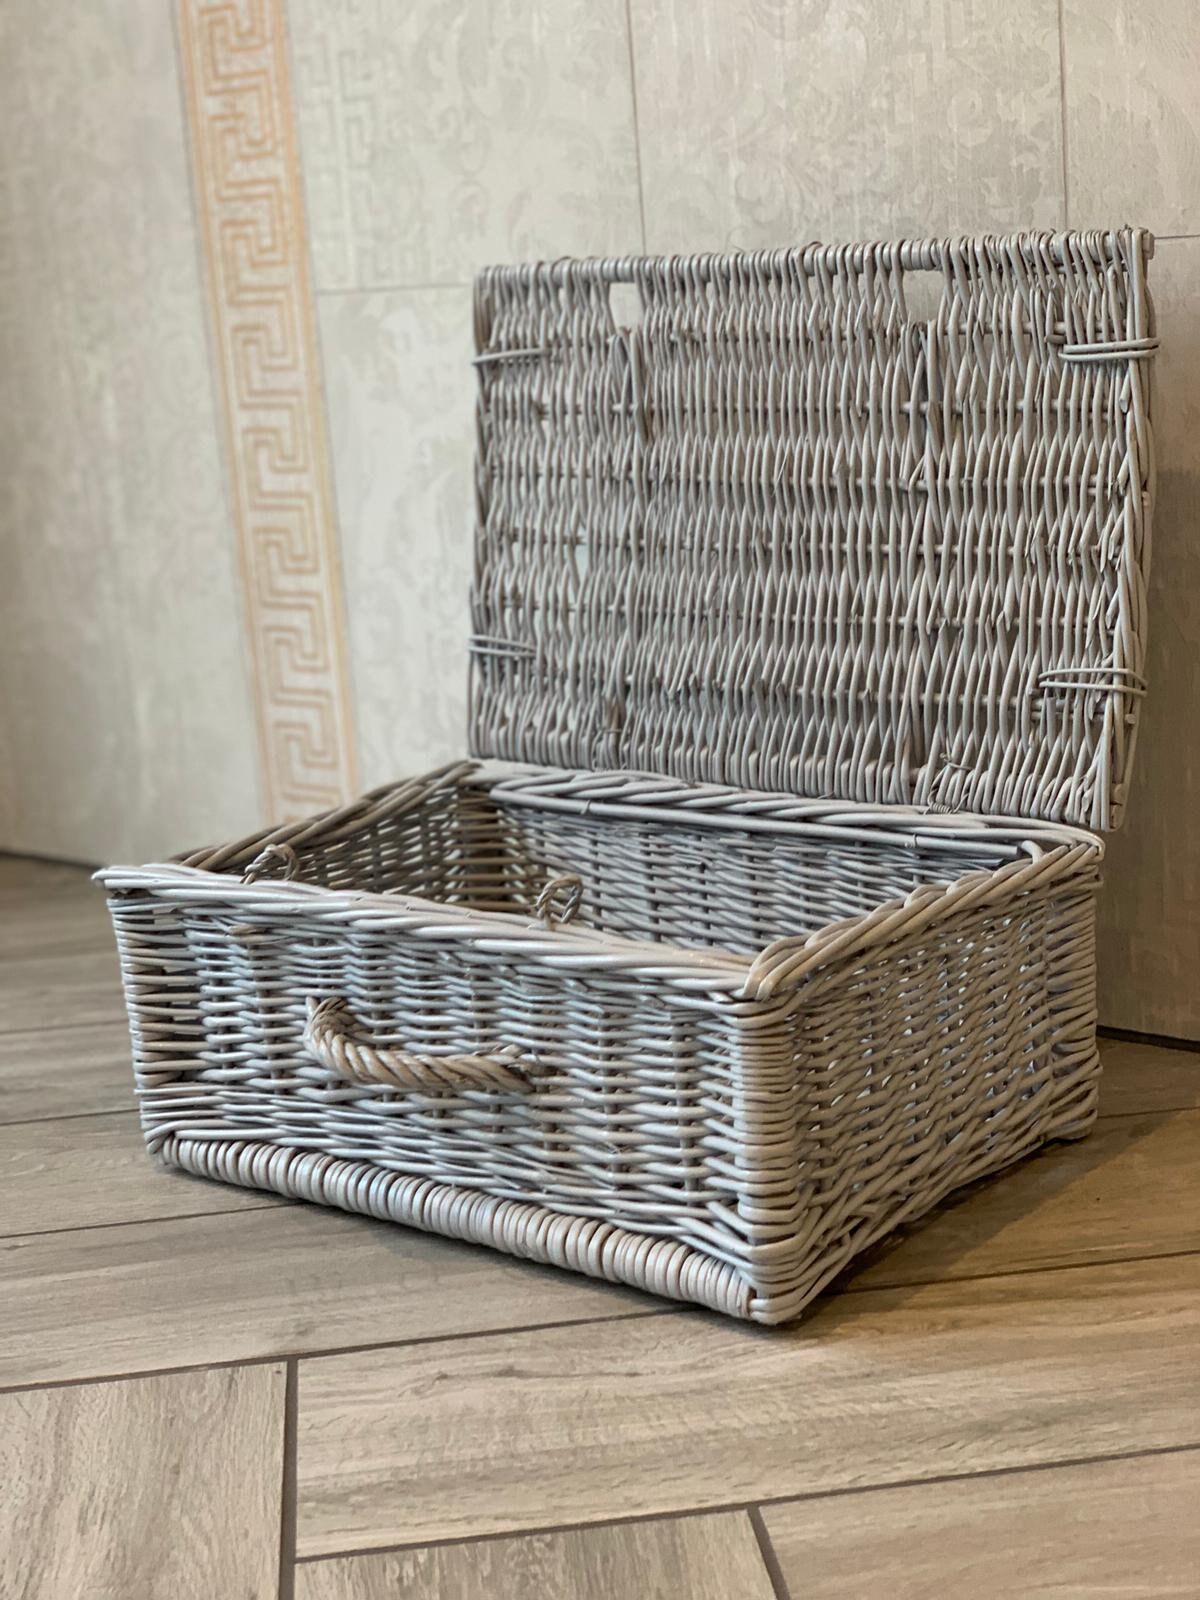 Wicker Suitcase Country Picnic Basket Rattan Weaving Storage Basket Suitcase Portable Weaving Box Case Bag Baskets for Outdoor,Outing,Travel,Camping 30x24x12cm 